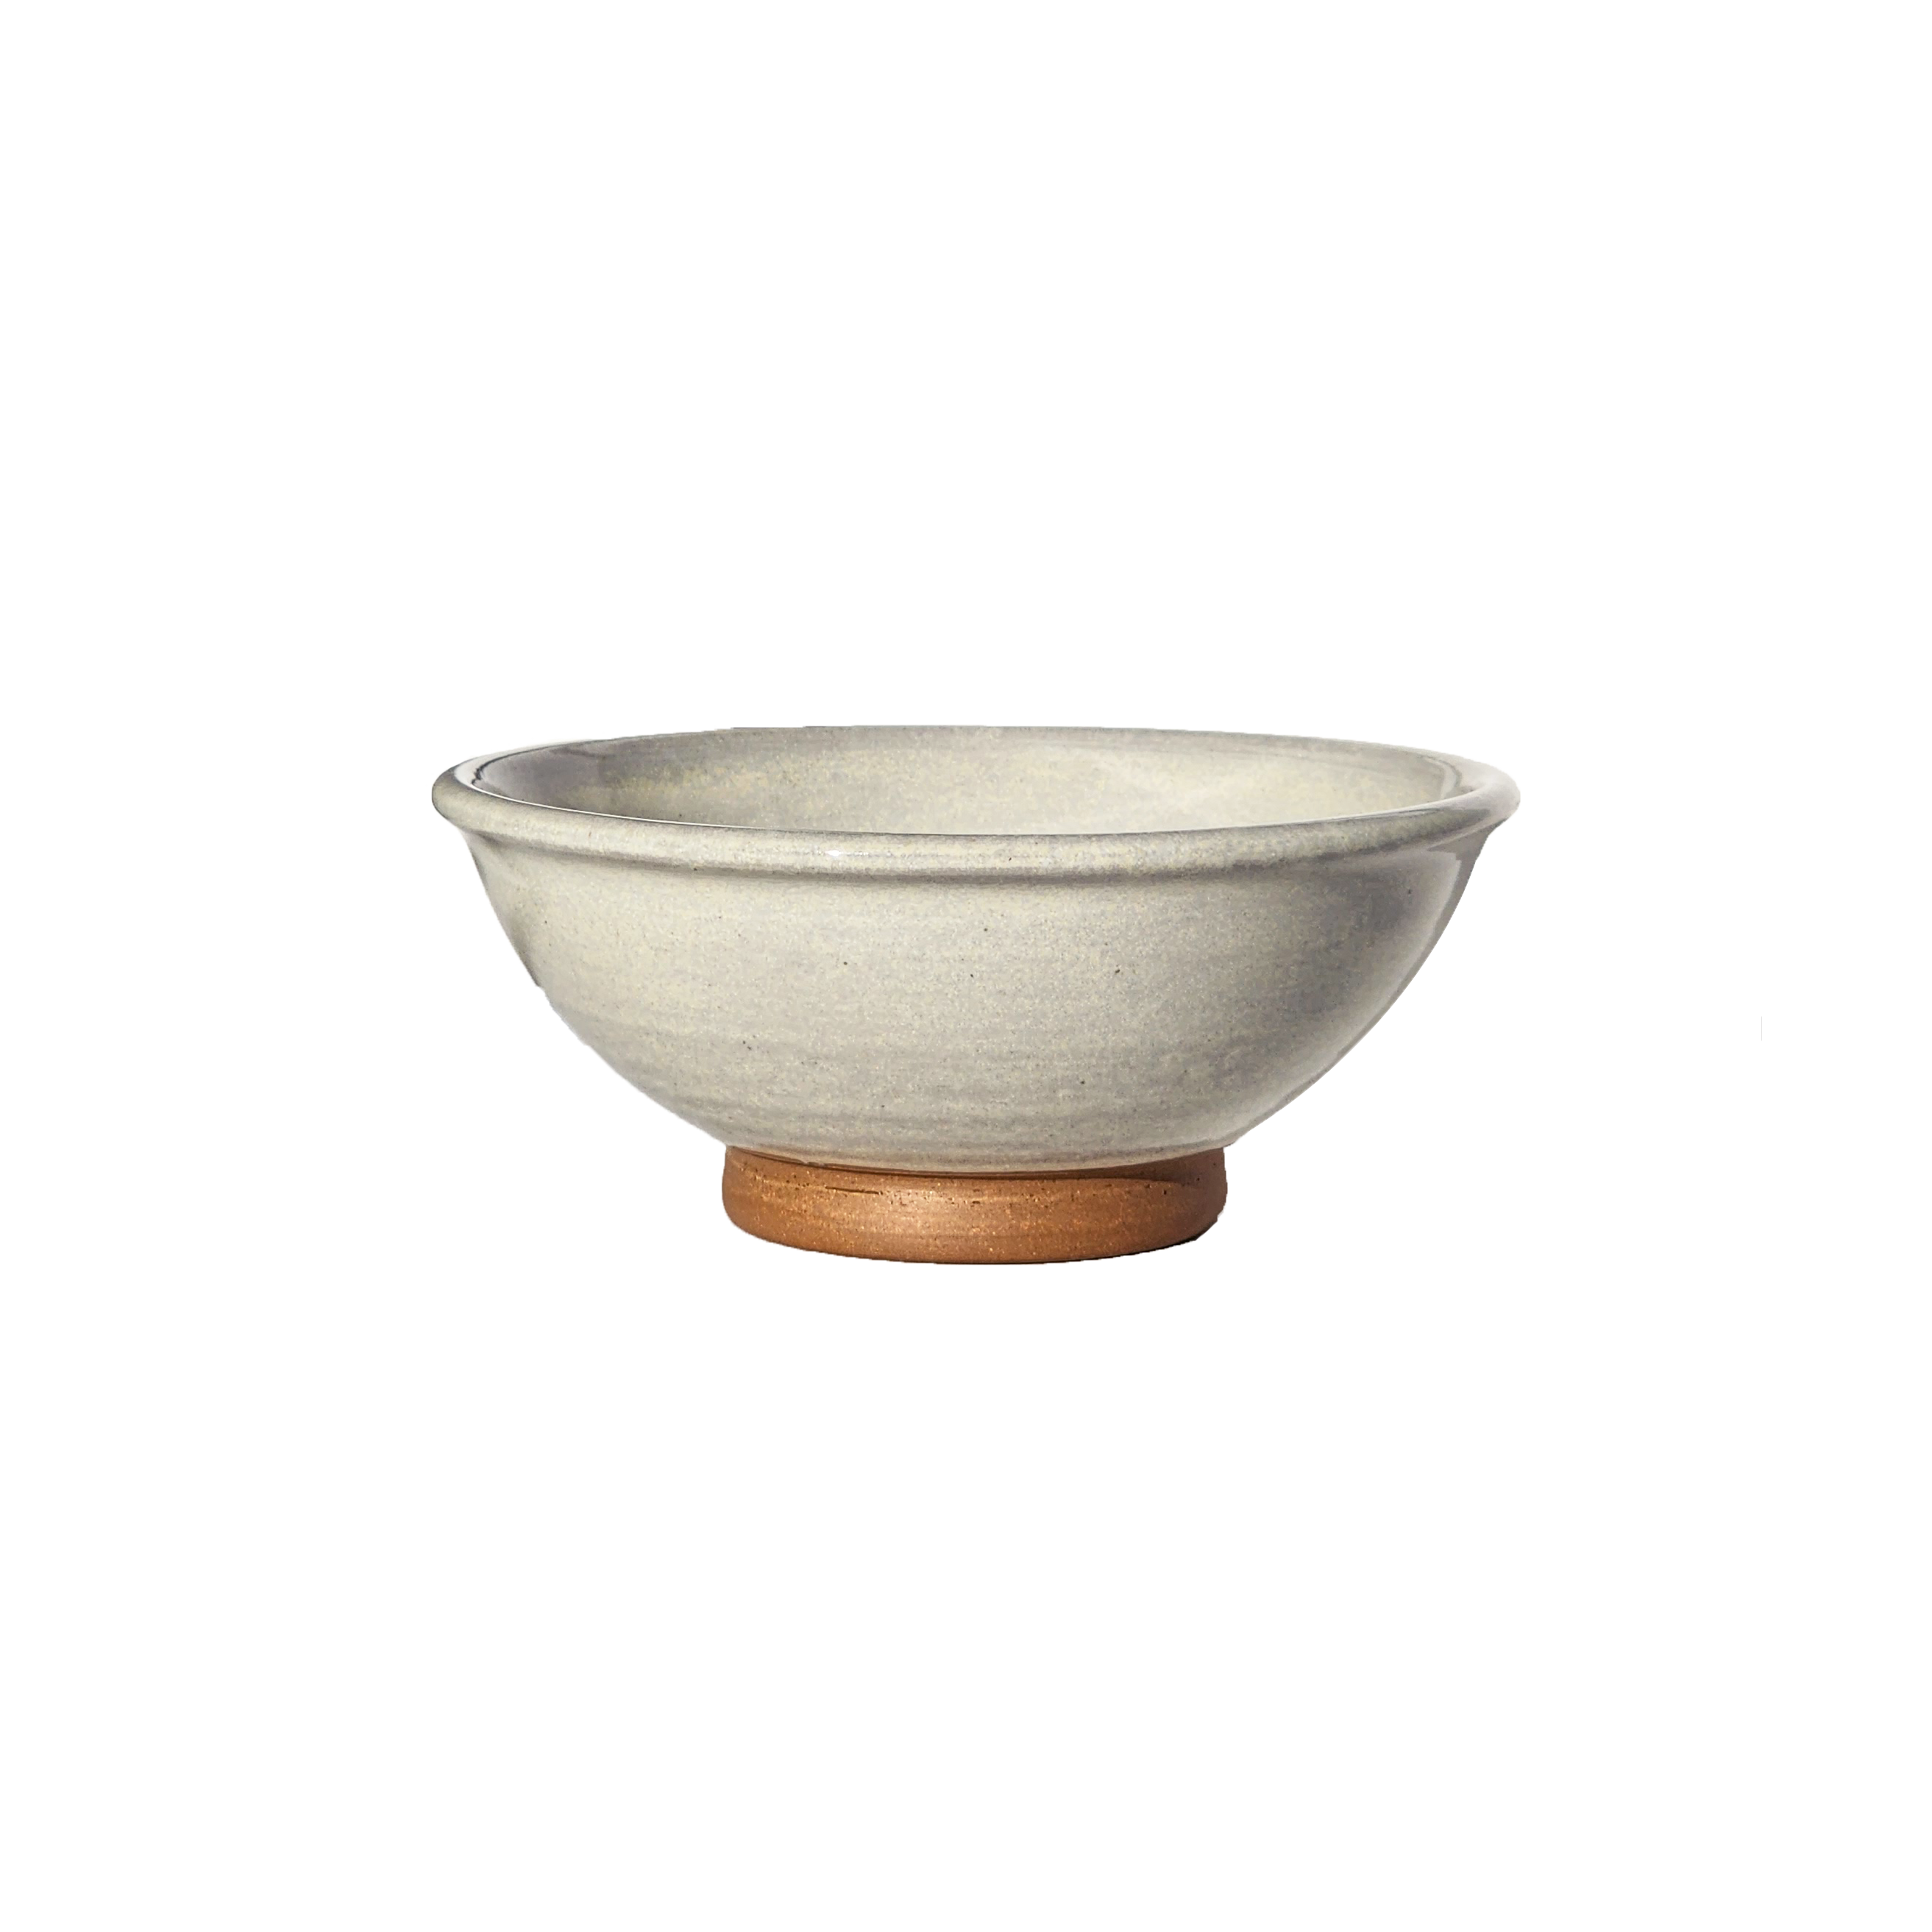 Image: A small mixing bowl in a classic white hue, providing a capacity of 2.25 cups. Perfect for ingredients, snacks, or condiments, this bowl offers timeless elegance and versatility for your kitchen needs.